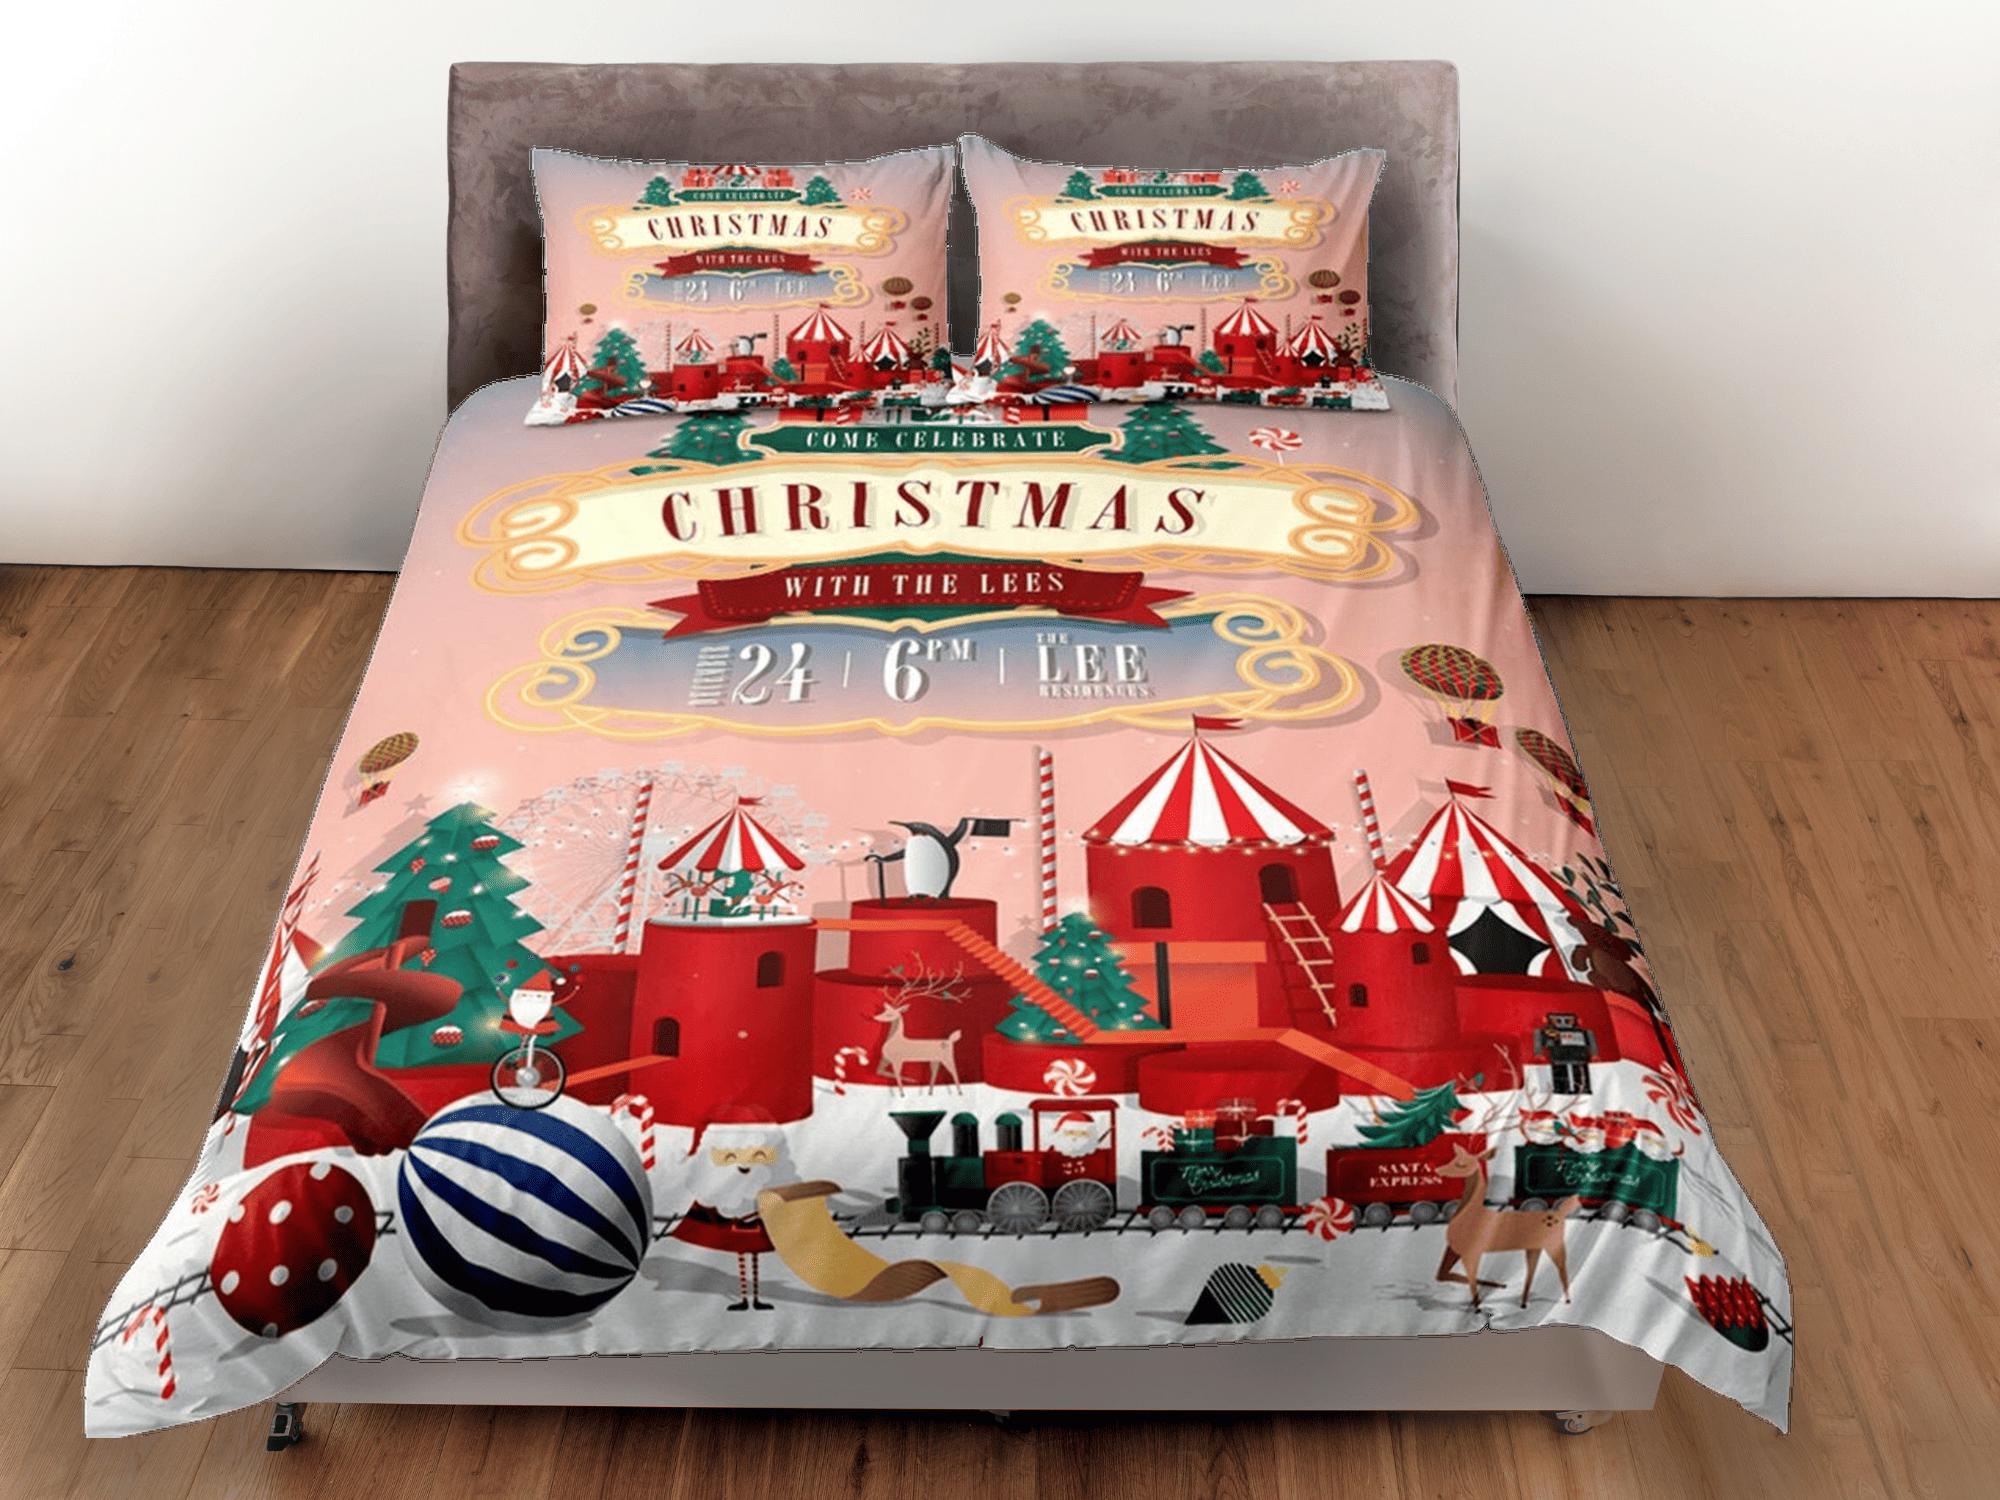 daintyduvet Christmas coral pink duvet cover set, christmas full size bedding & pillowcase, college bedding, toddler bedding, holiday gift room decor